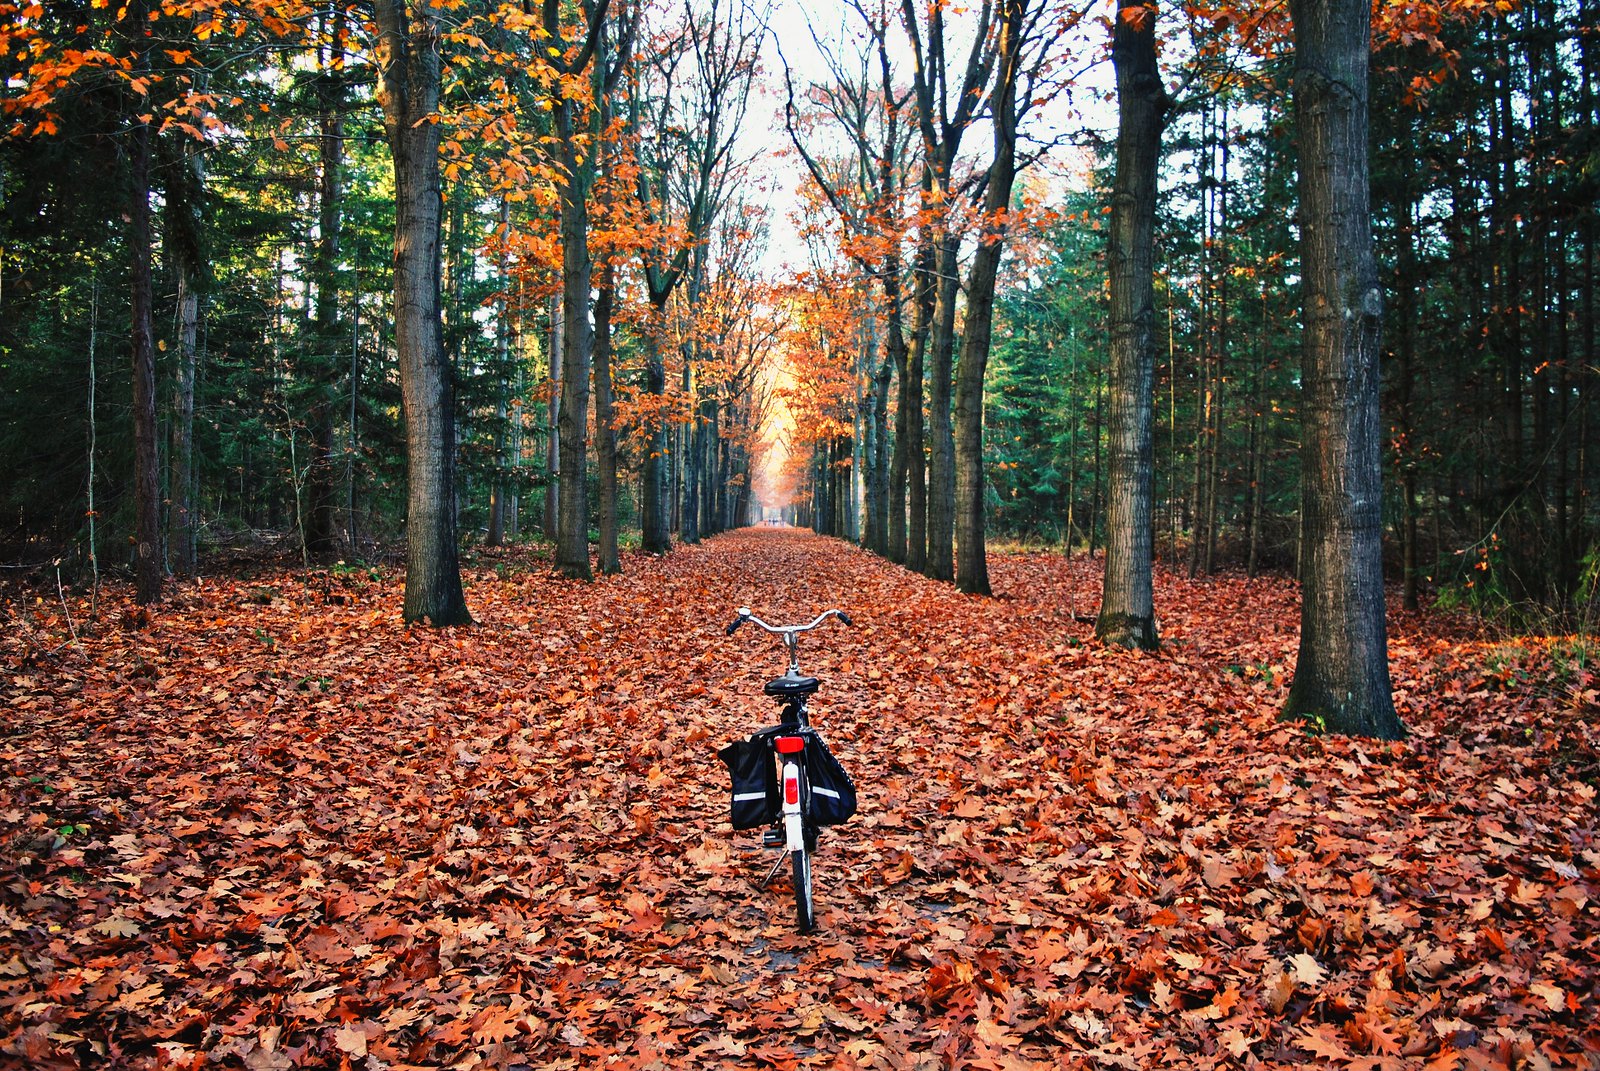 Autumn bicycle rides are the best!